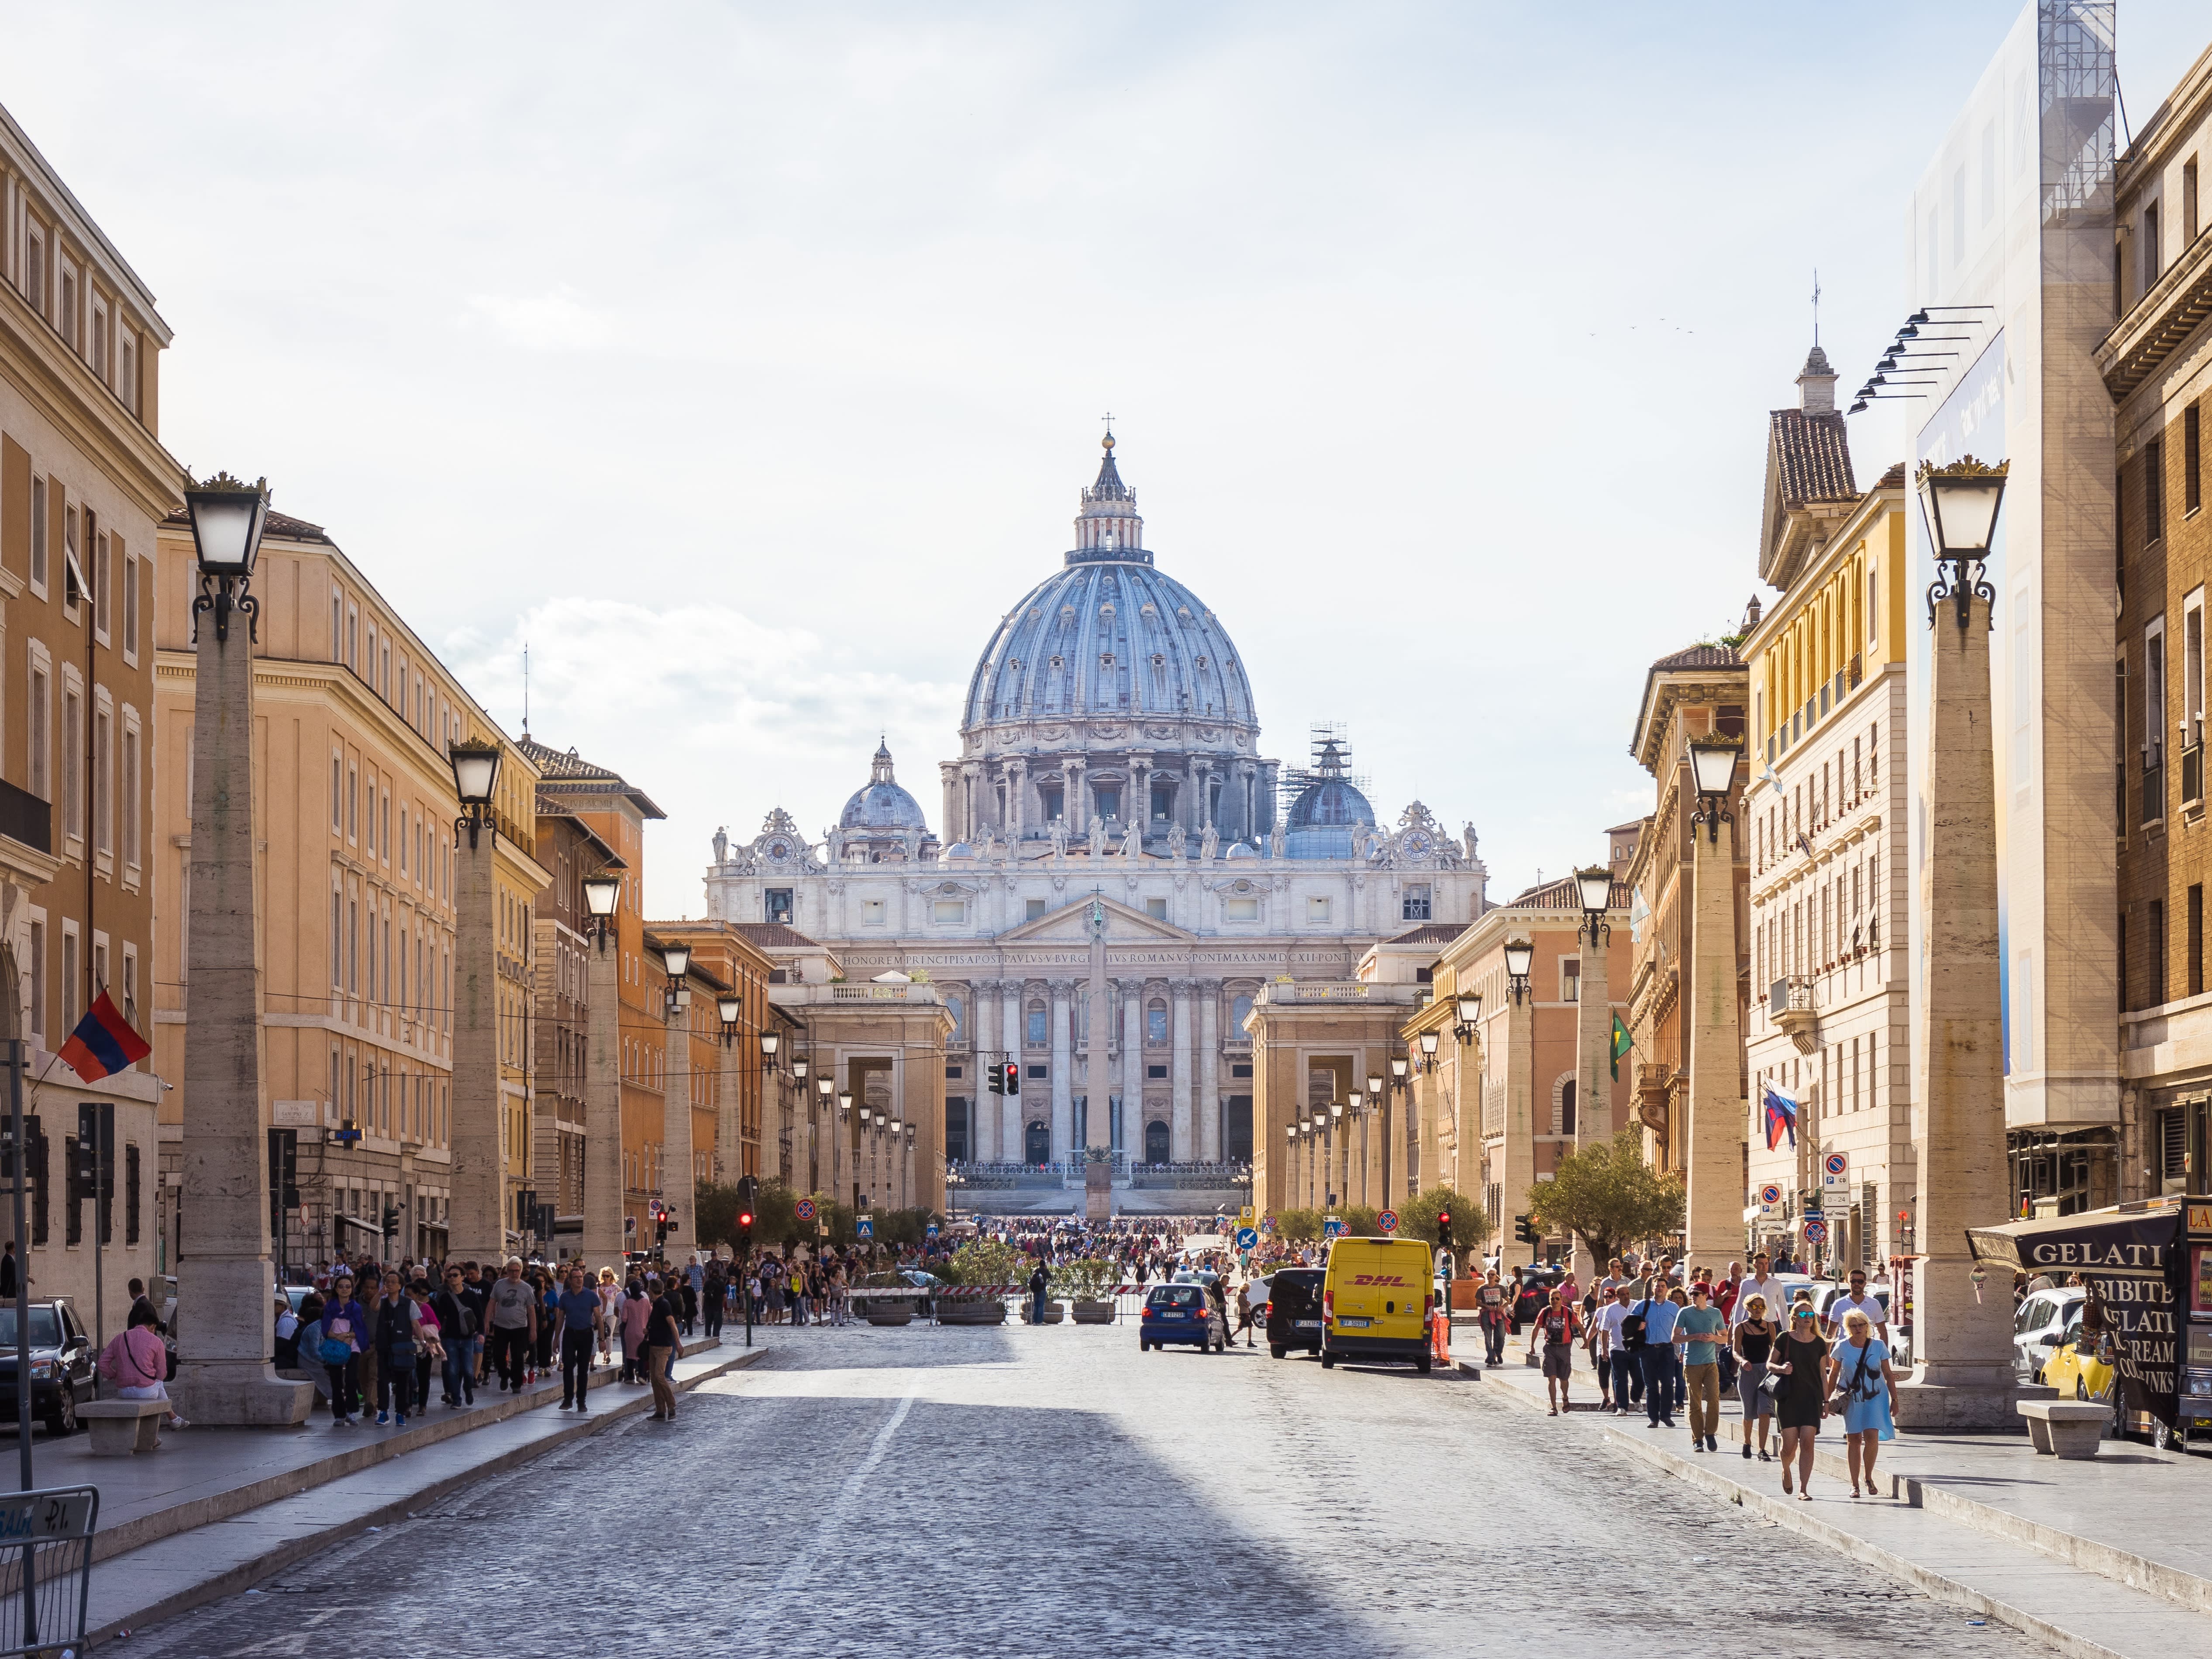 A picture of the boulevard filled with people leading up to the Saint Peter's Basilica taken on a sunny day.